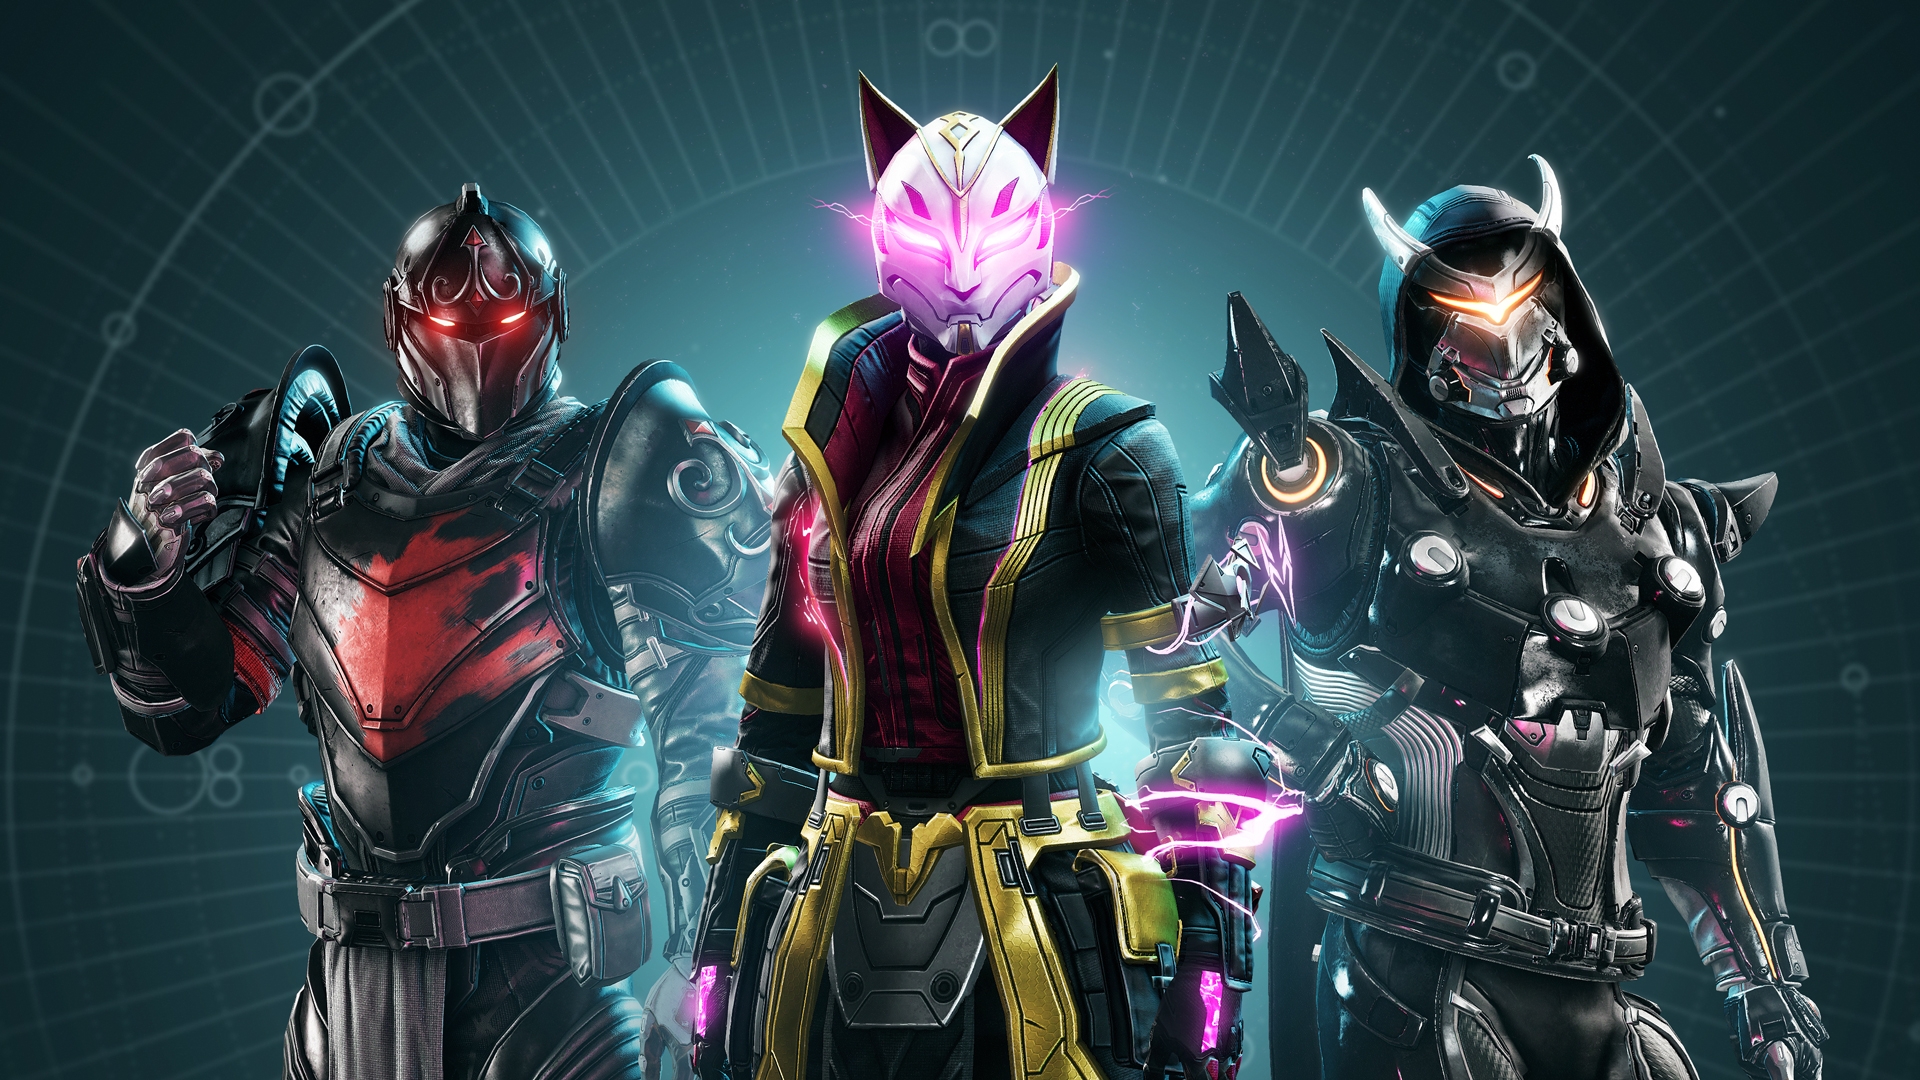 A Titan, Warlock, and Hunter dressed in Fortnite skins for an upcoming Destiny 2 crossover